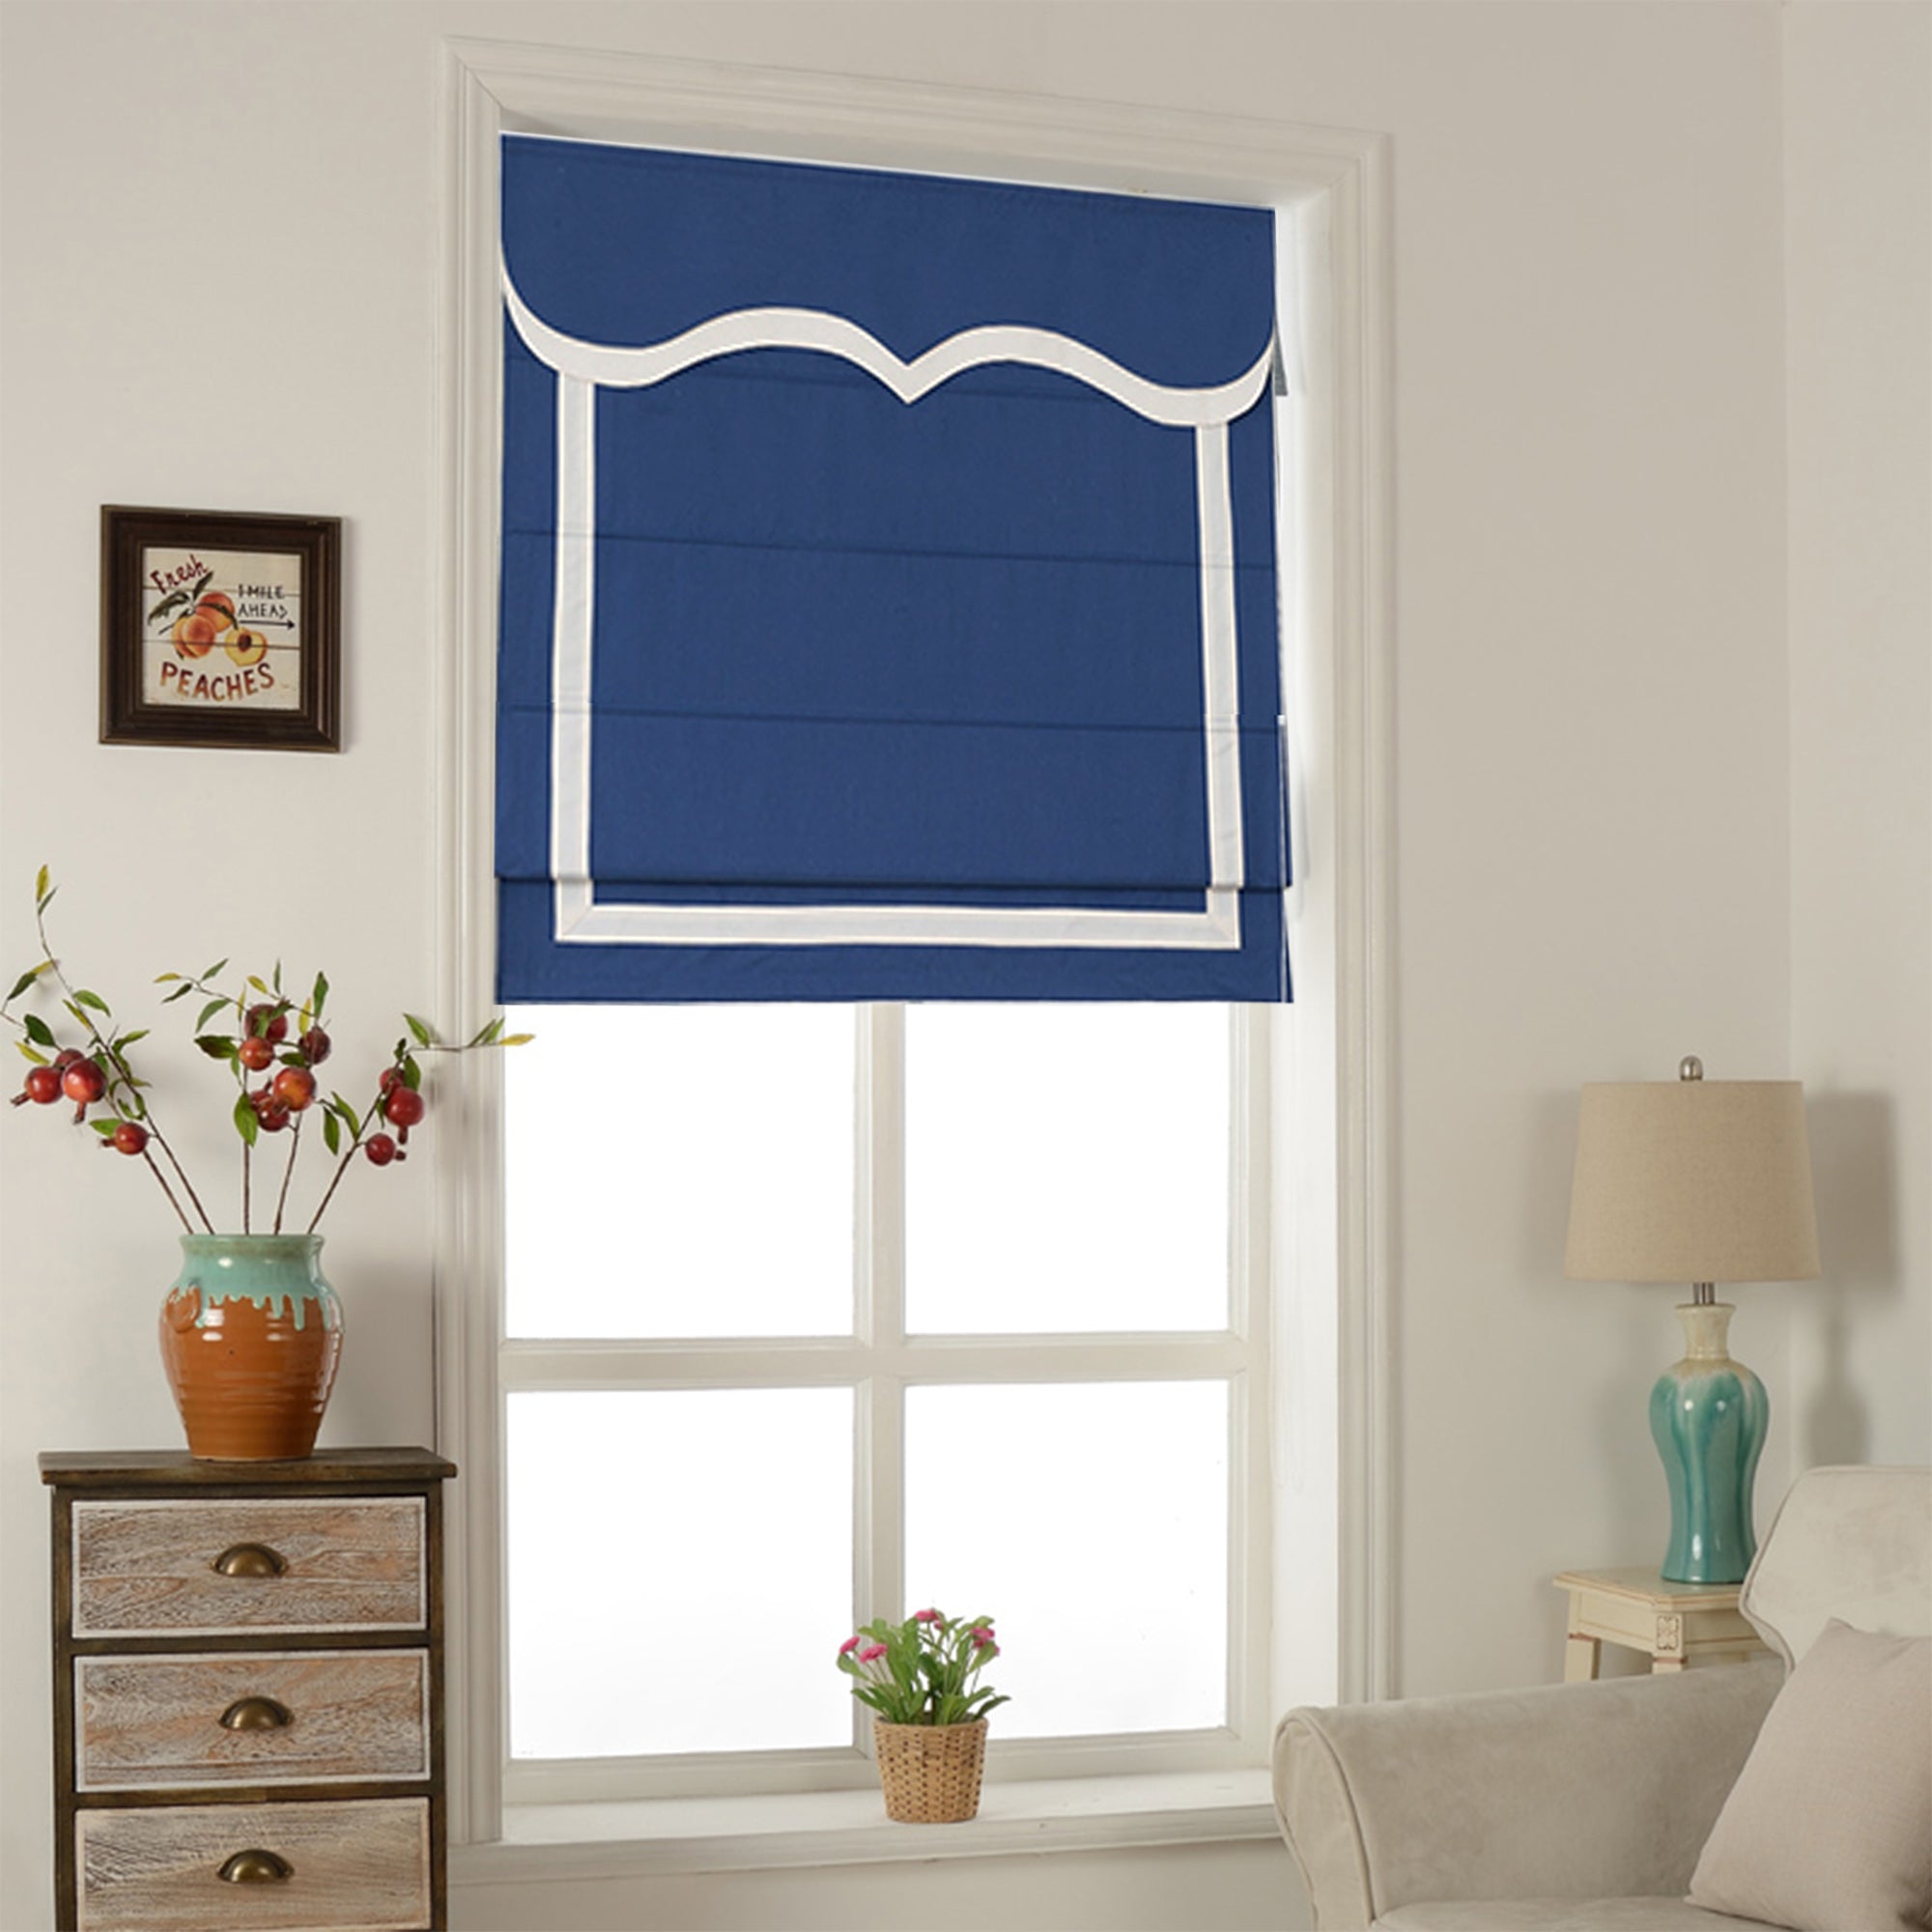 Quick Fix Washable Roman Window Shades Flat Fold with Valance, SG-014 Blue with White Trim